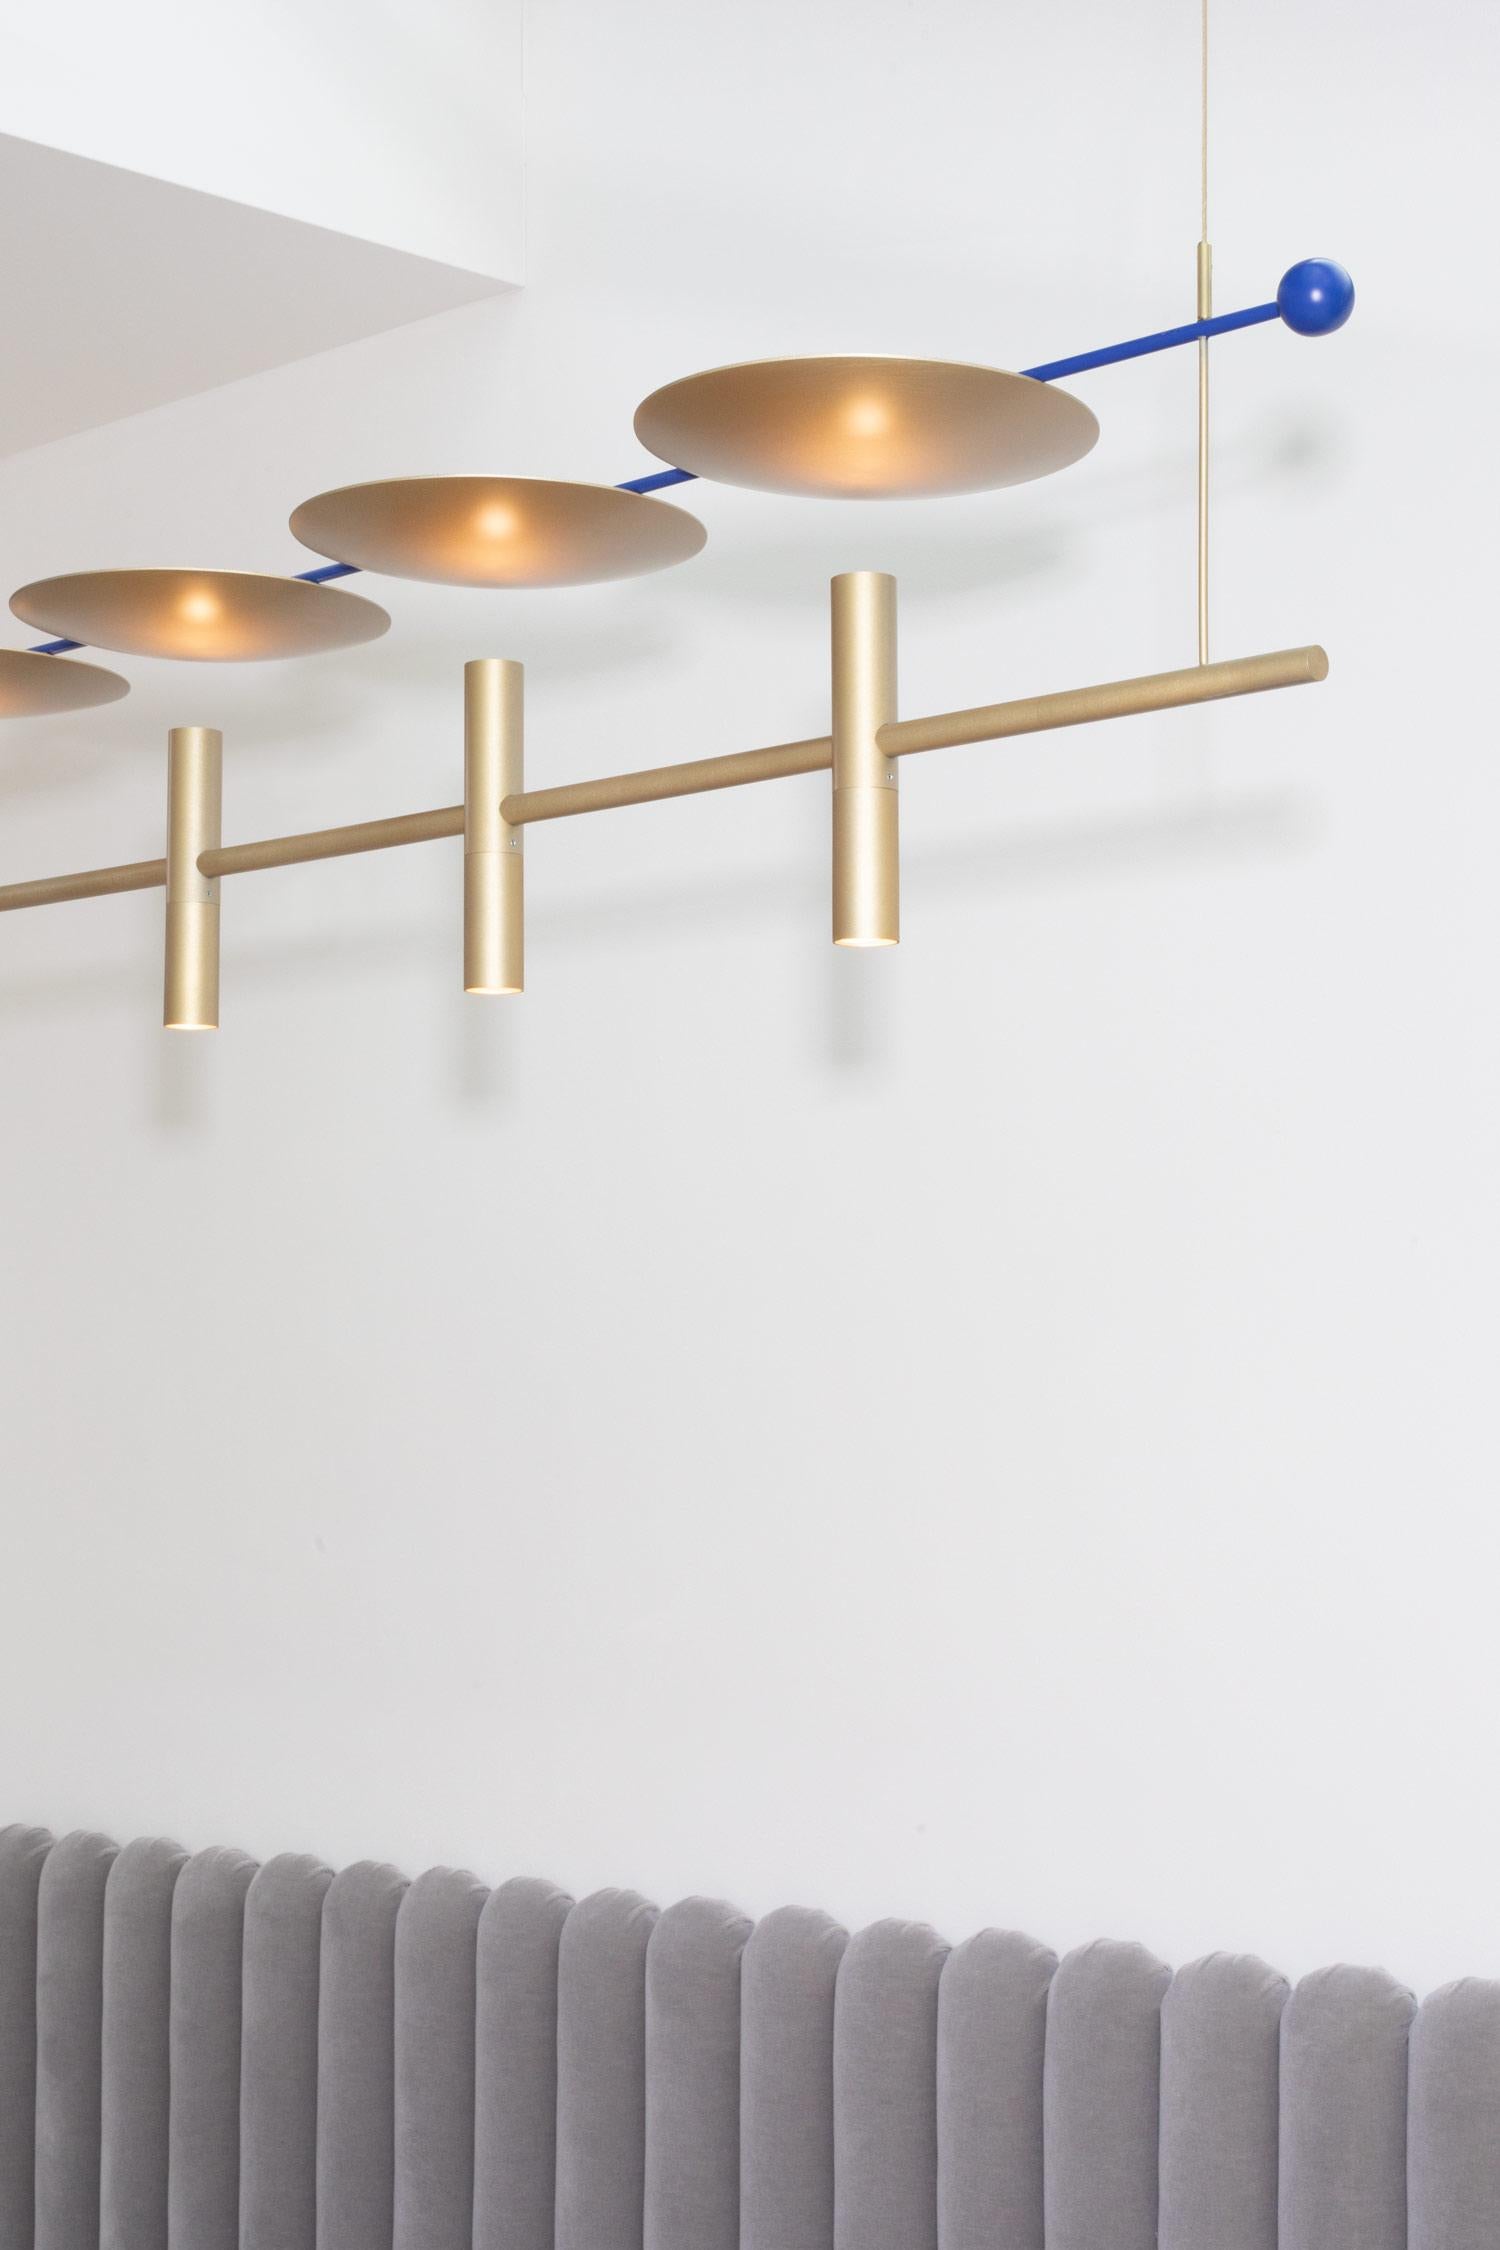 Lunae Luminaire / Chandelier Horizontal I05 in Gold In New Condition For Sale In Prague 3, Vinohrady